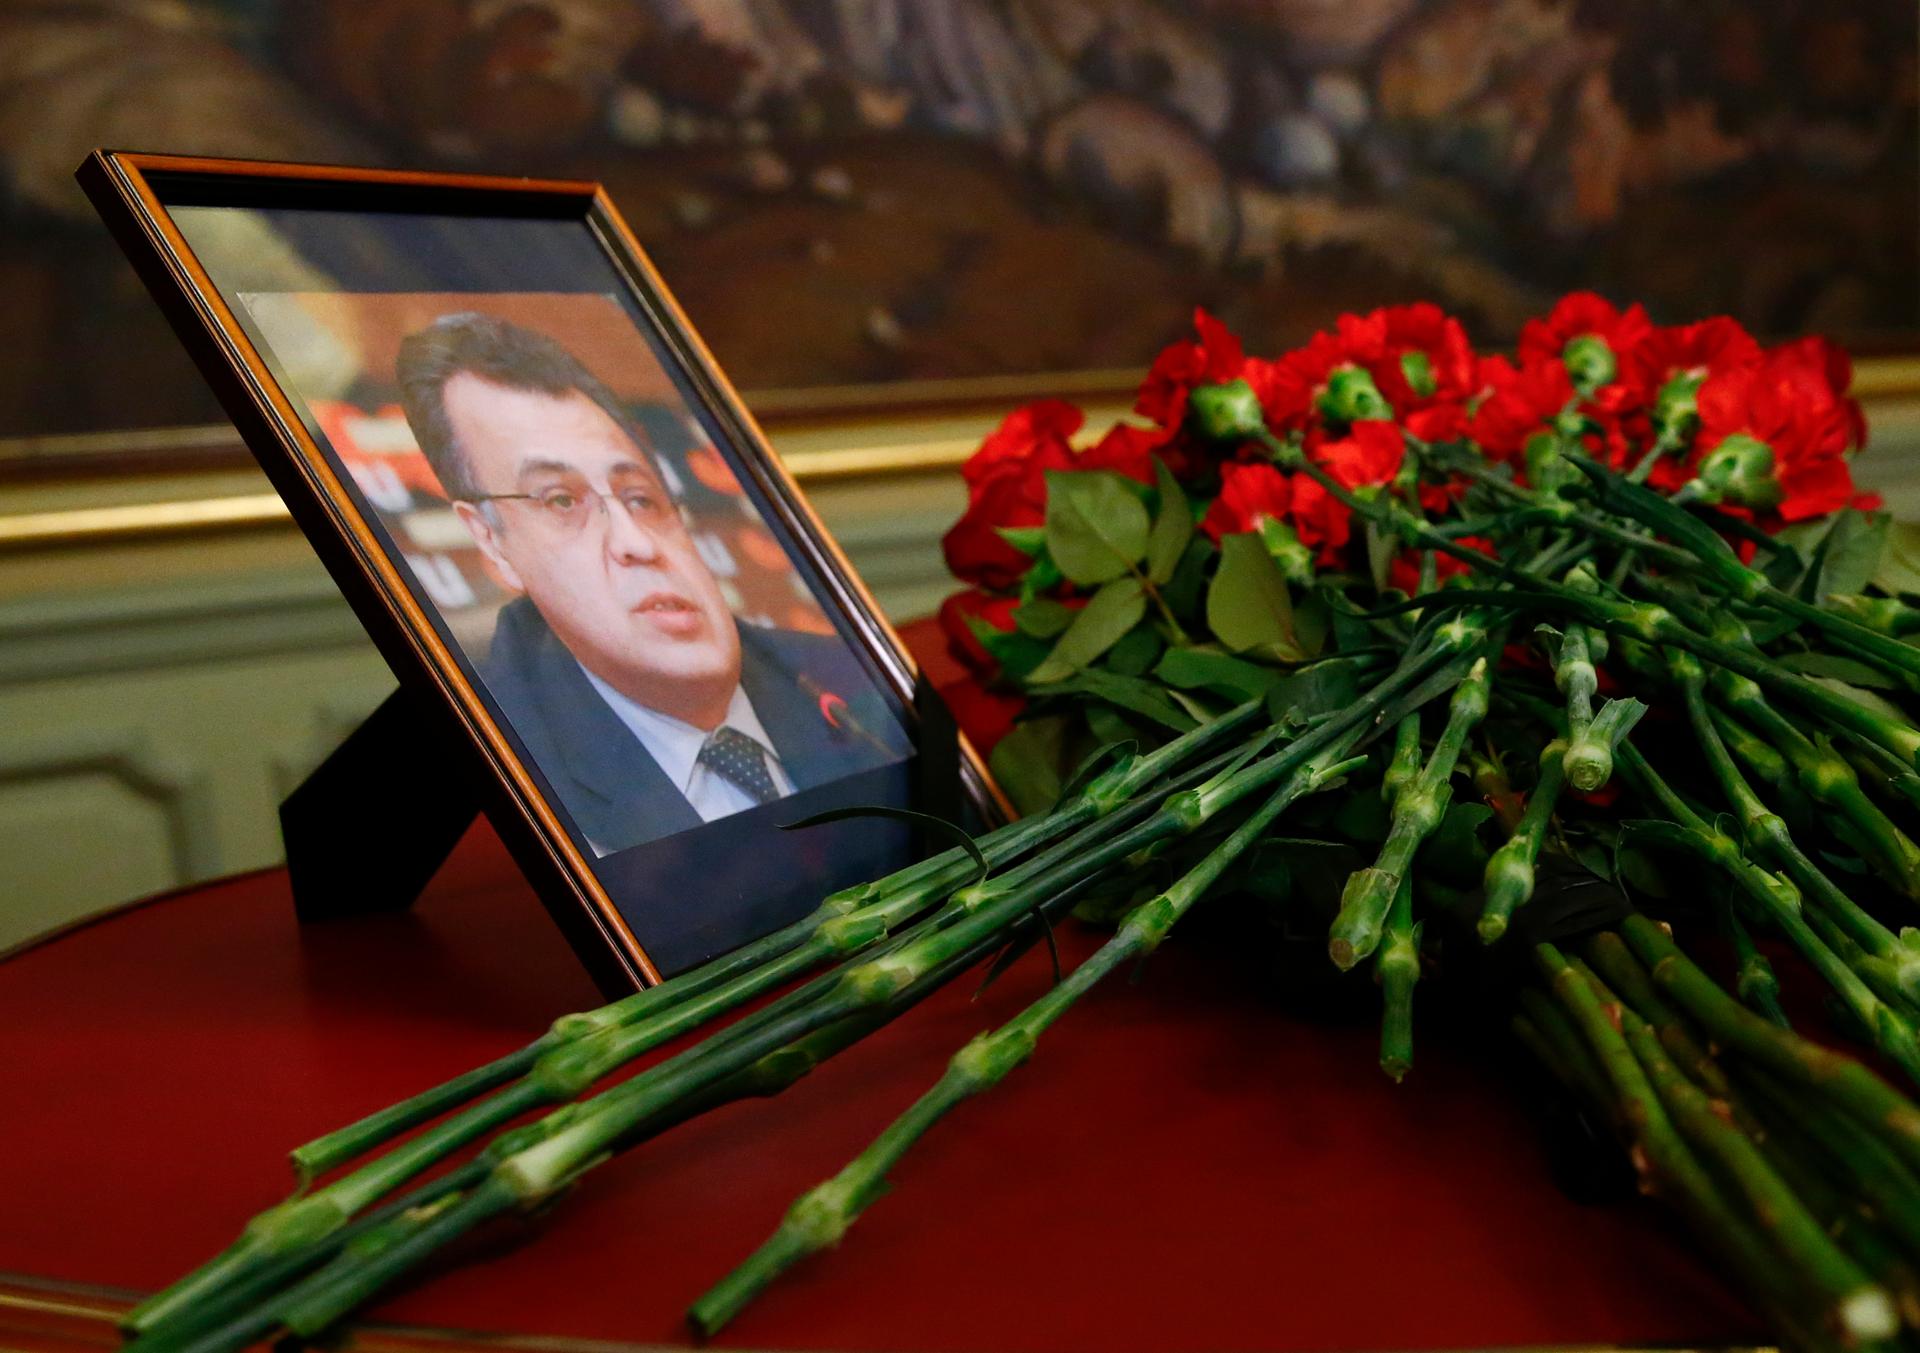 Flowers are placed near a portrait of murdered Russian ambassador to Turkey Andrei Karlov